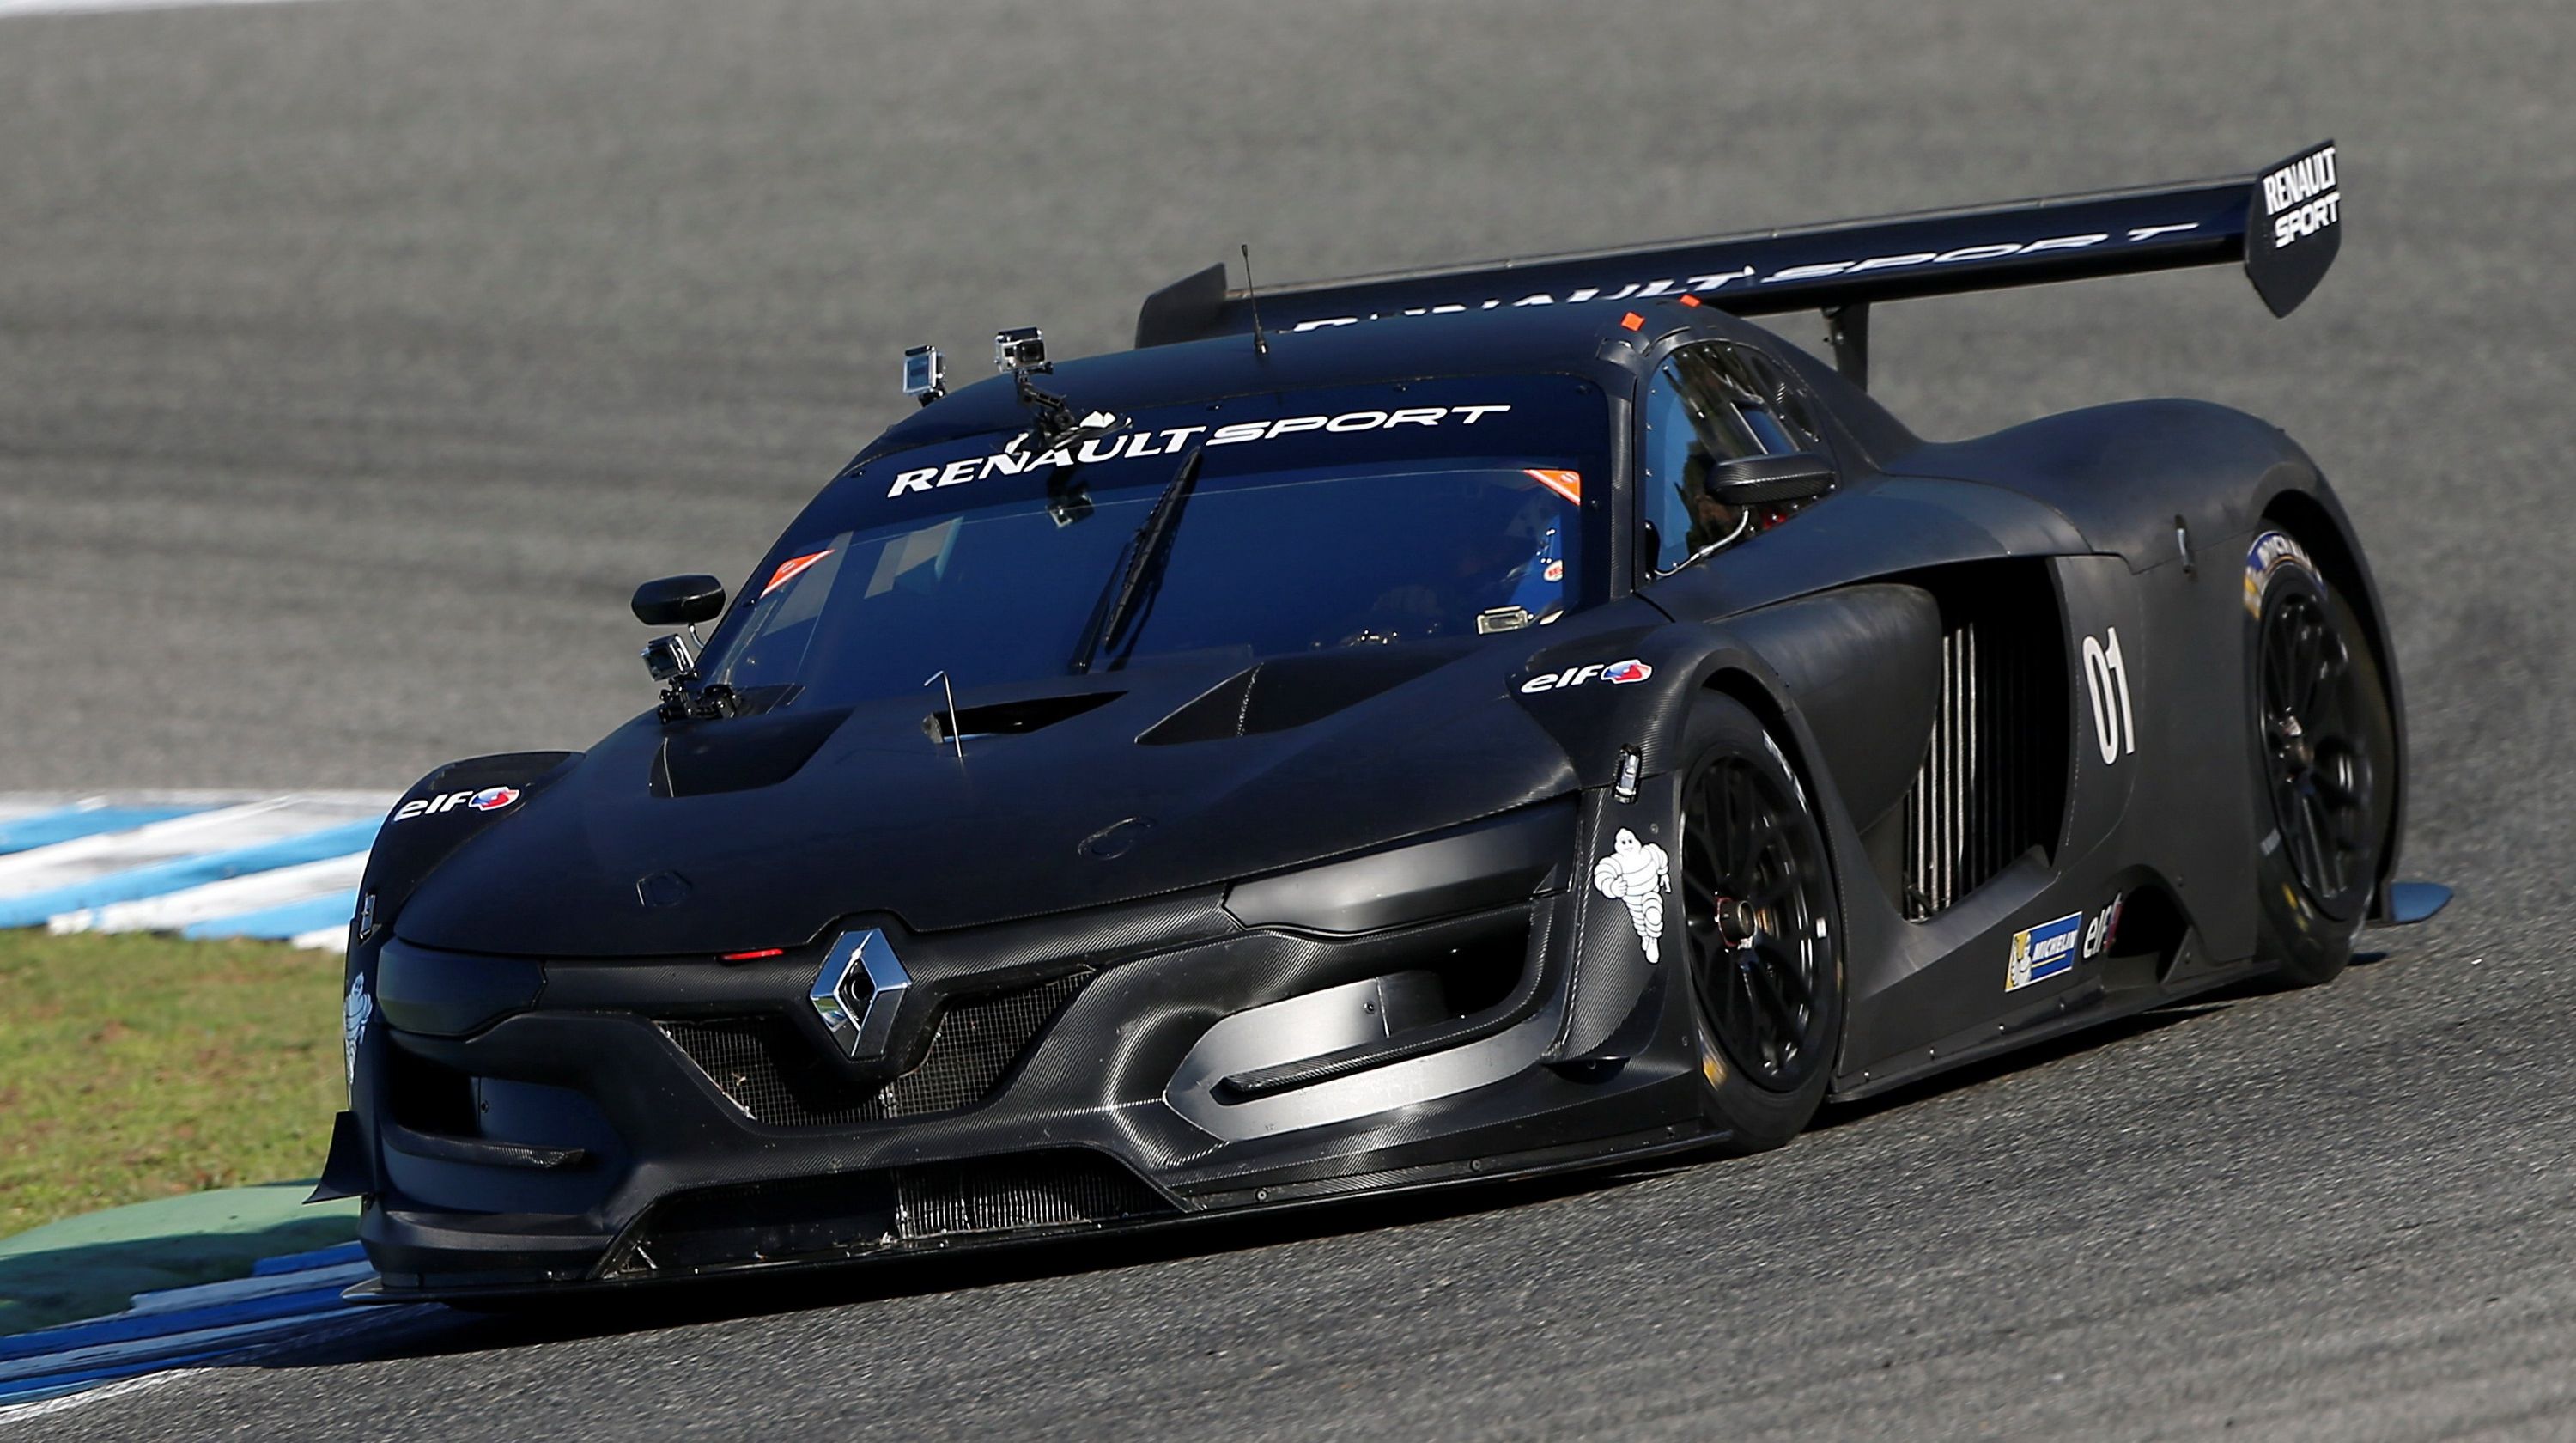  The Renaultsport R.S. 01 made its racetrack debut on October 8th for the last few laps of the World Series by Renault wearing this sleek, black livery. 